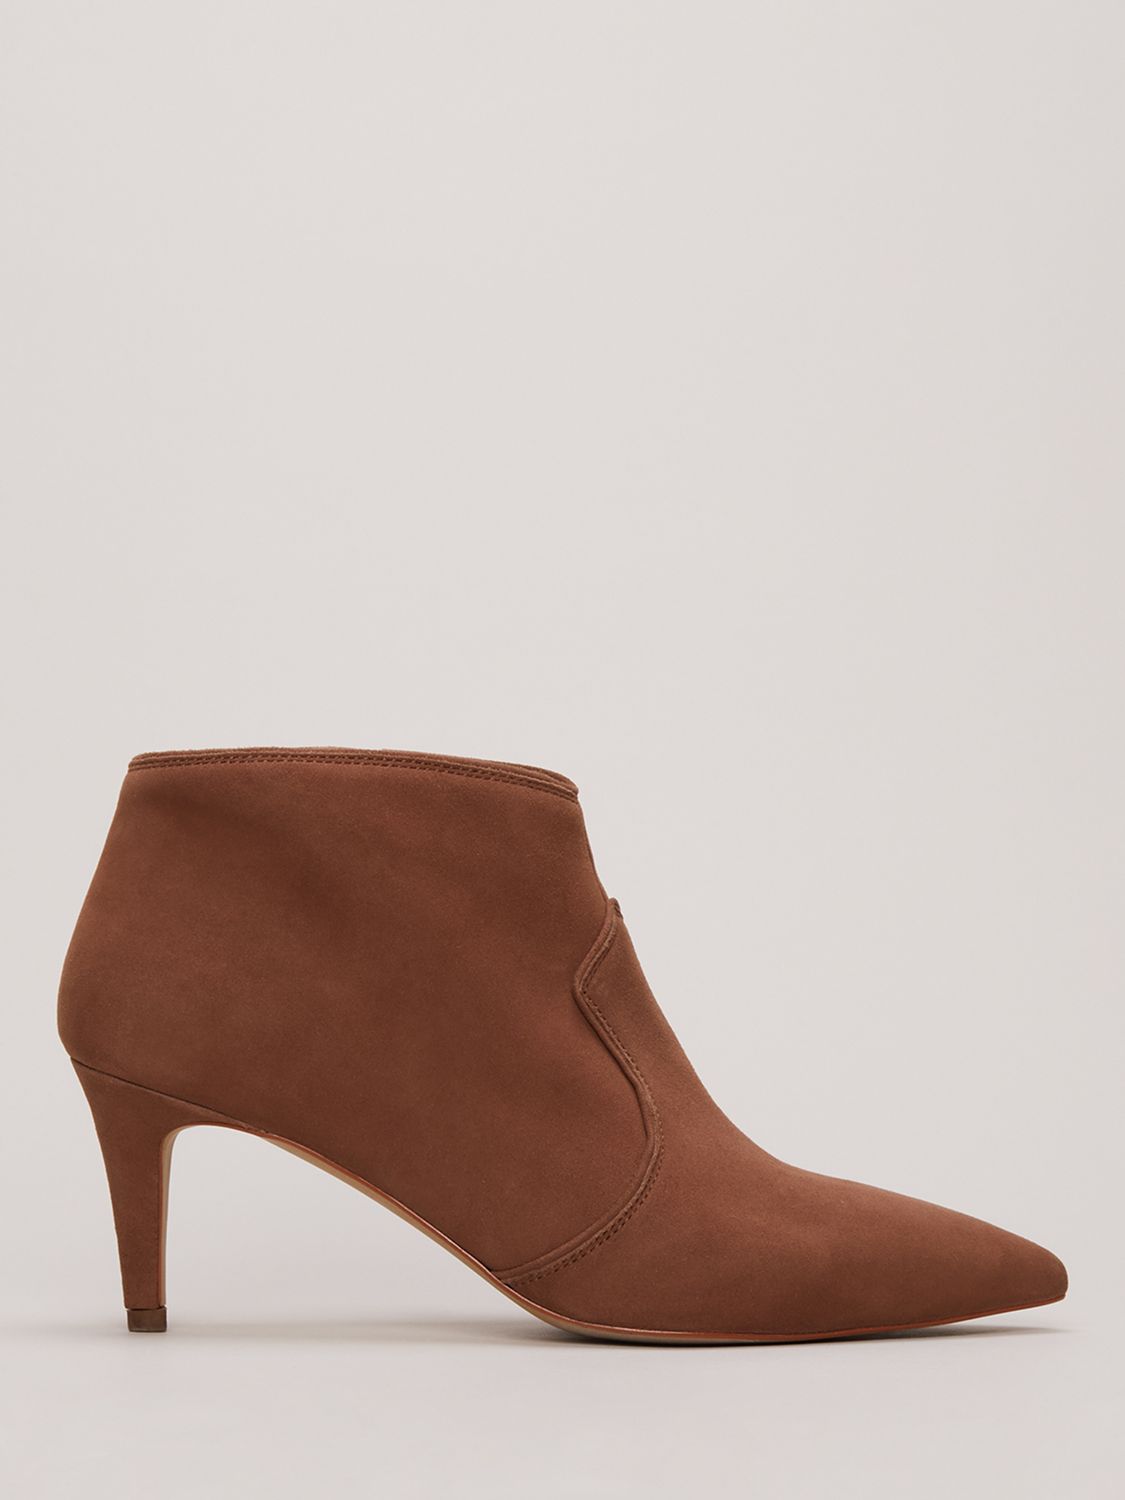 Phase Eight Suede Shoe Boots, Tan, EU36